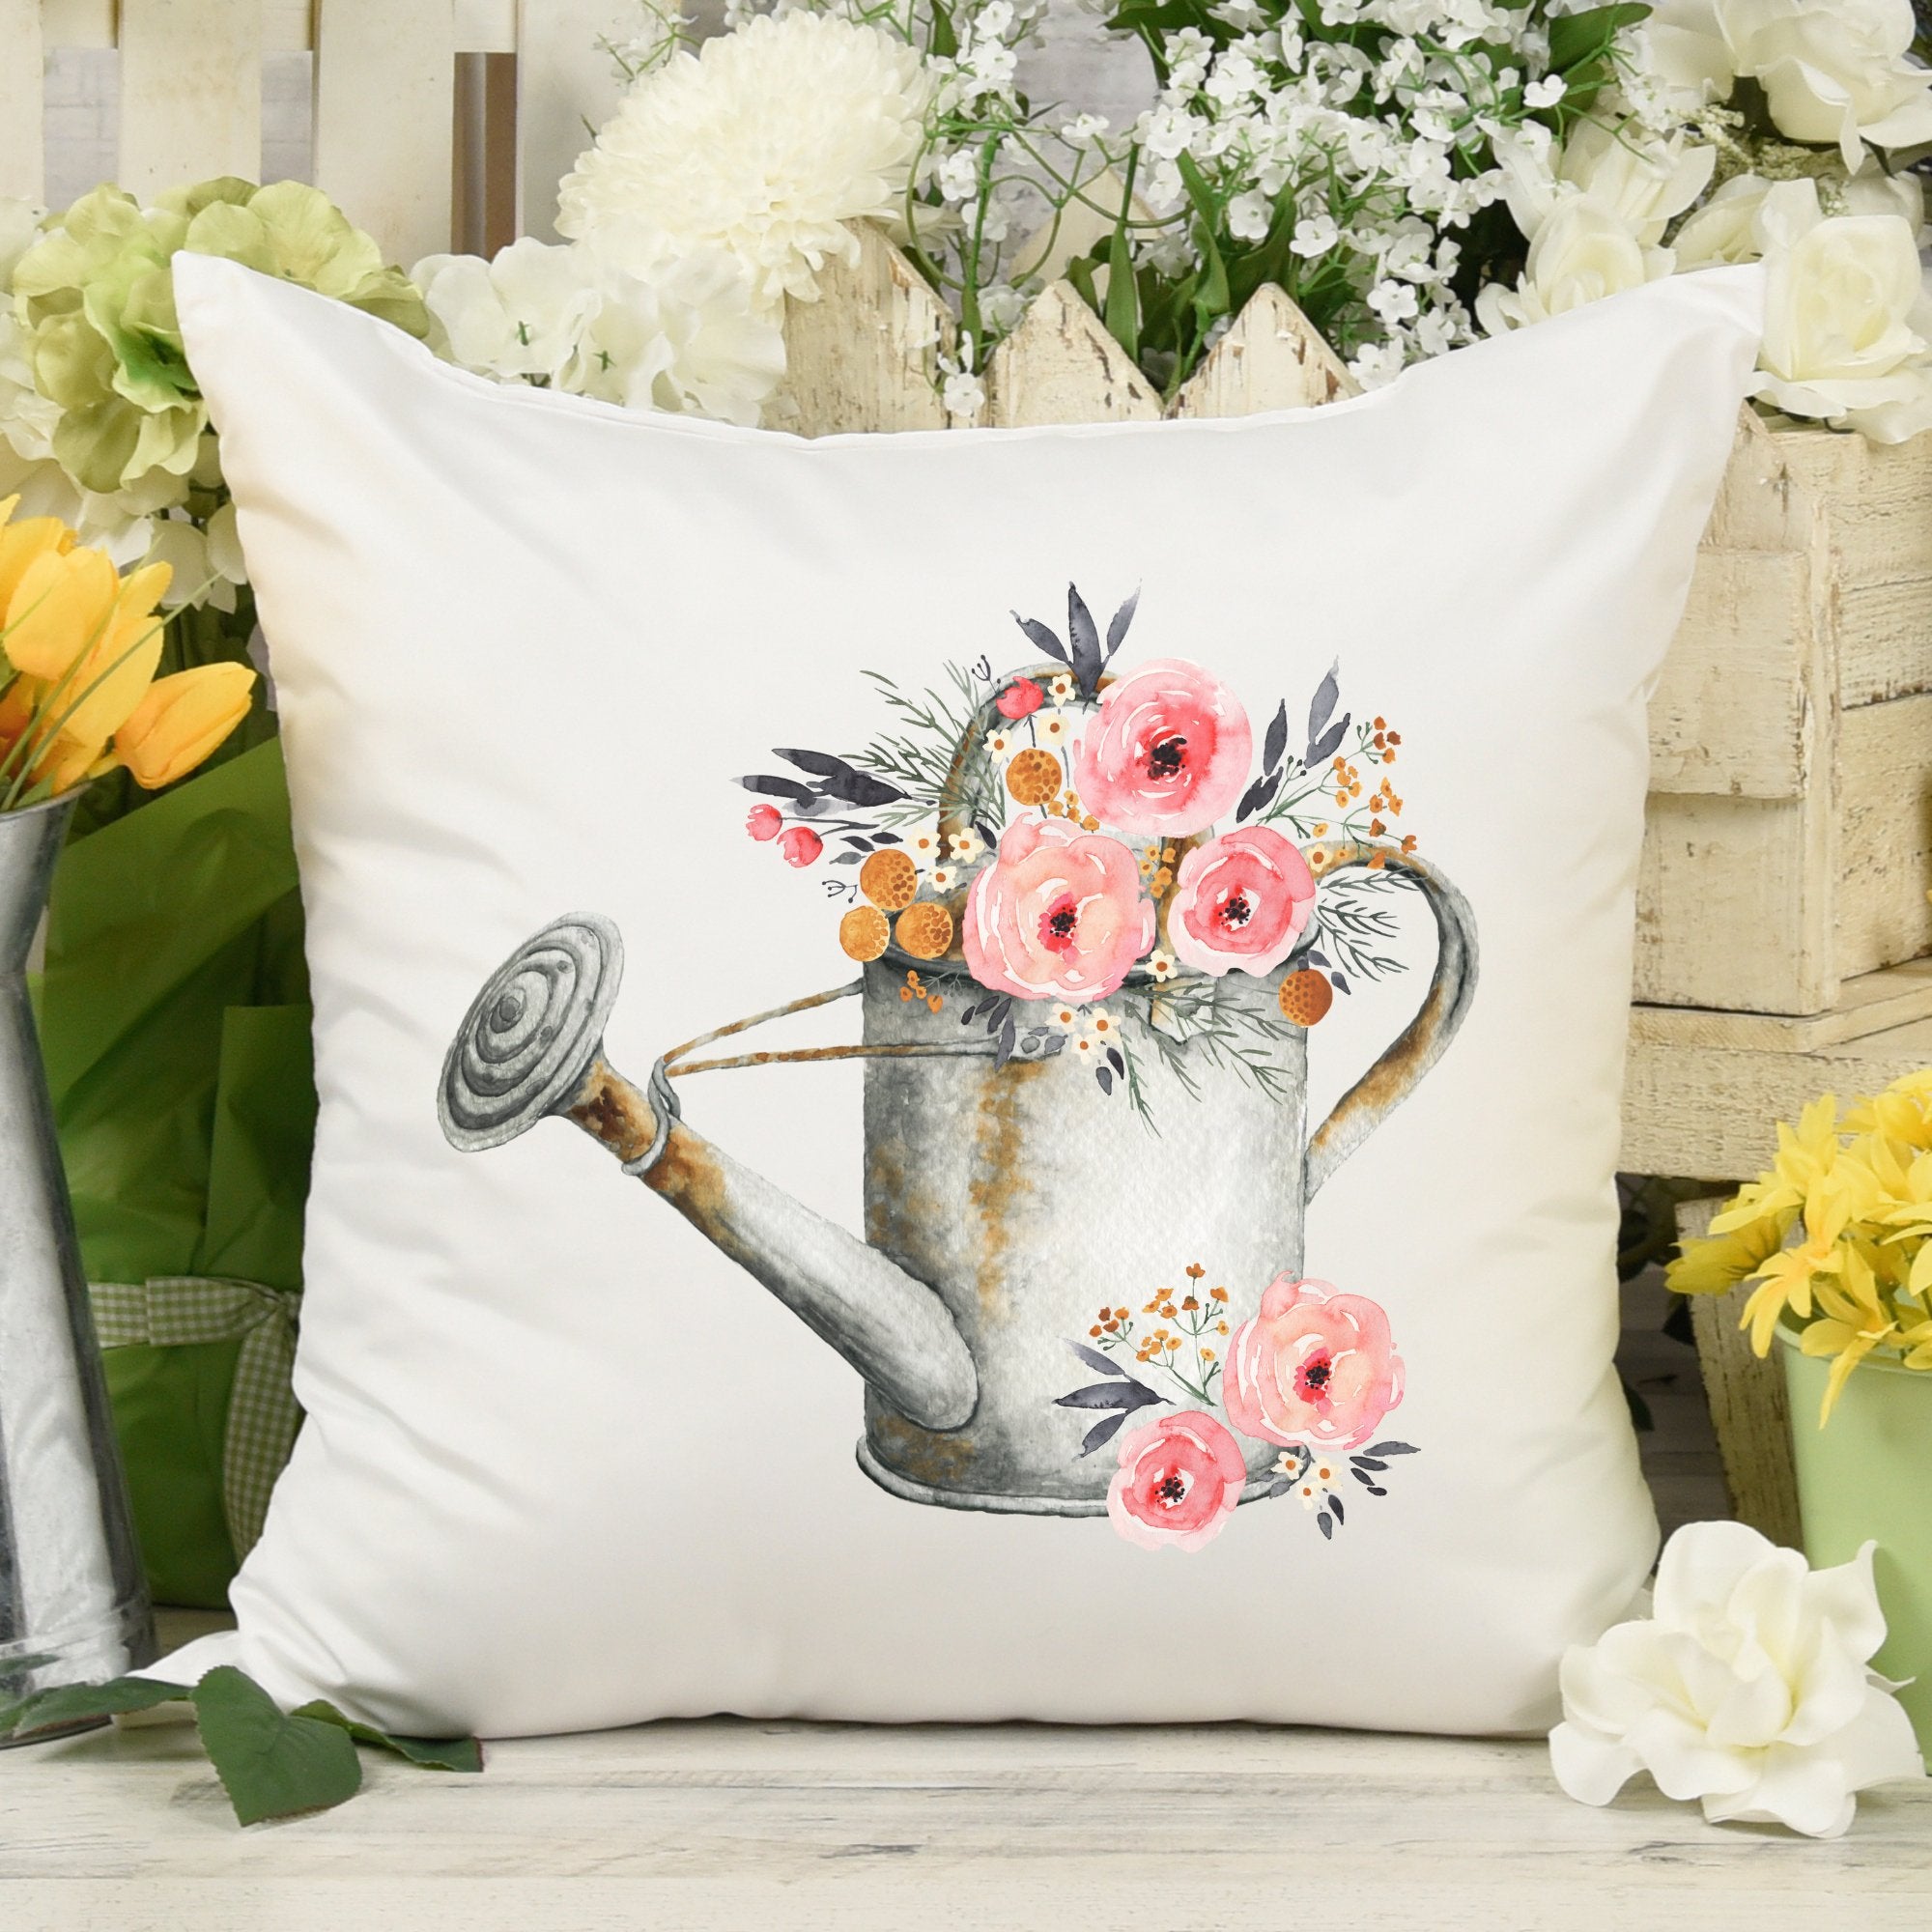 Flower Watering Can Pillow Cover - Trendznmore